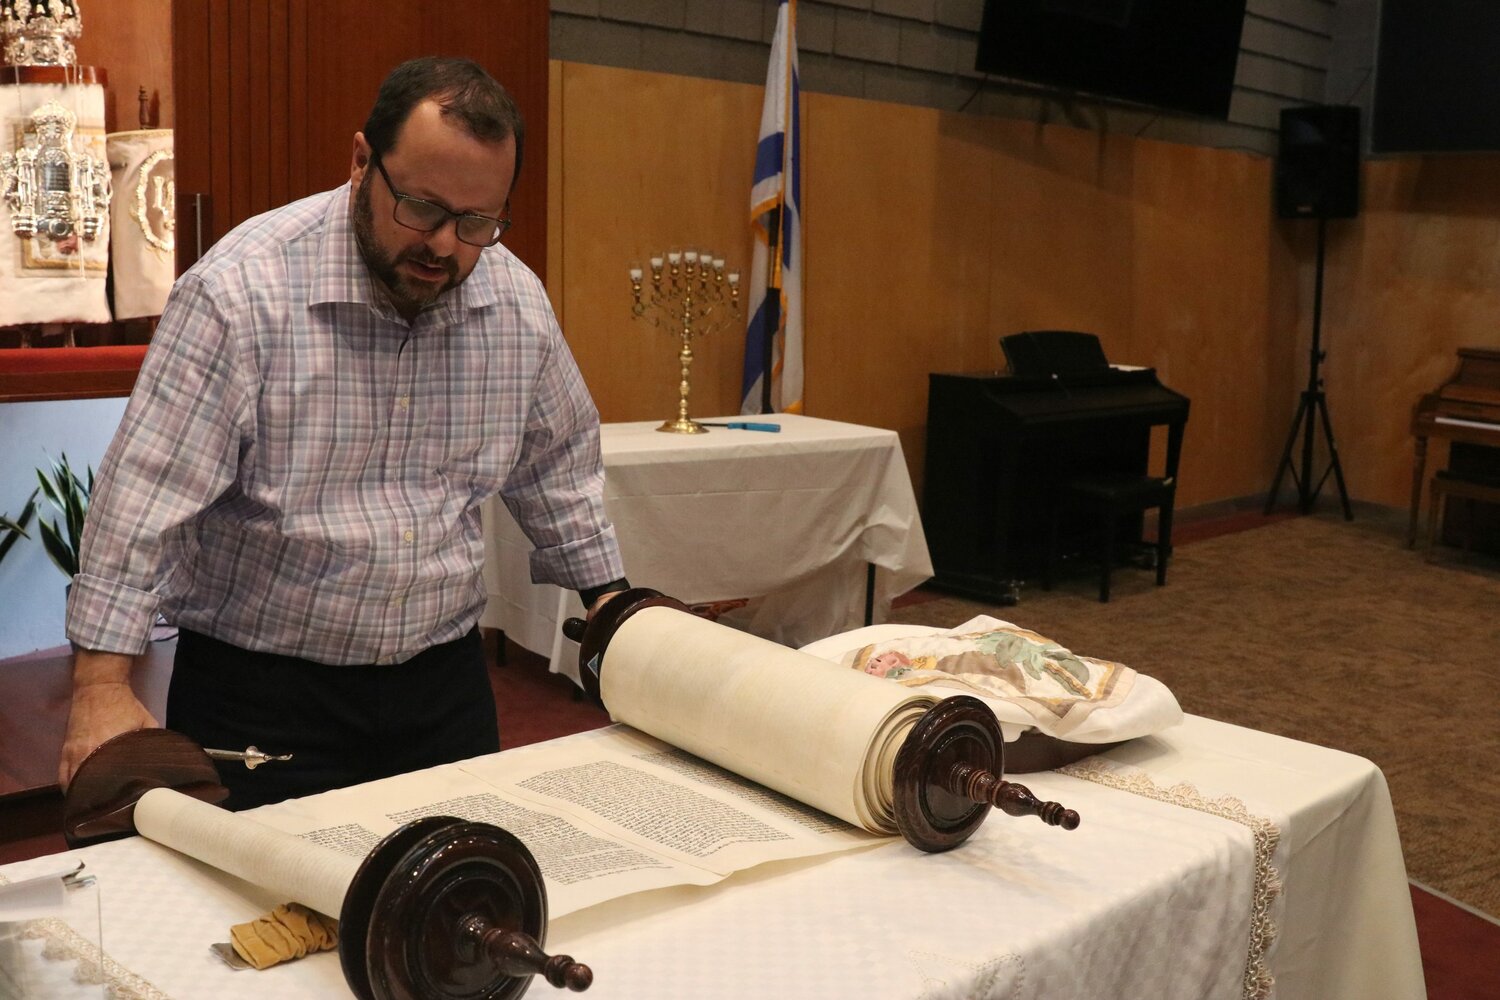 Rabbi Jeremy Schneider unrolls and reads the Torah scroll at Temple Kol Ami in Scottsdale on Sept. 20, 2023. (Photo by Jacob Snelgrove/Cronkite News)